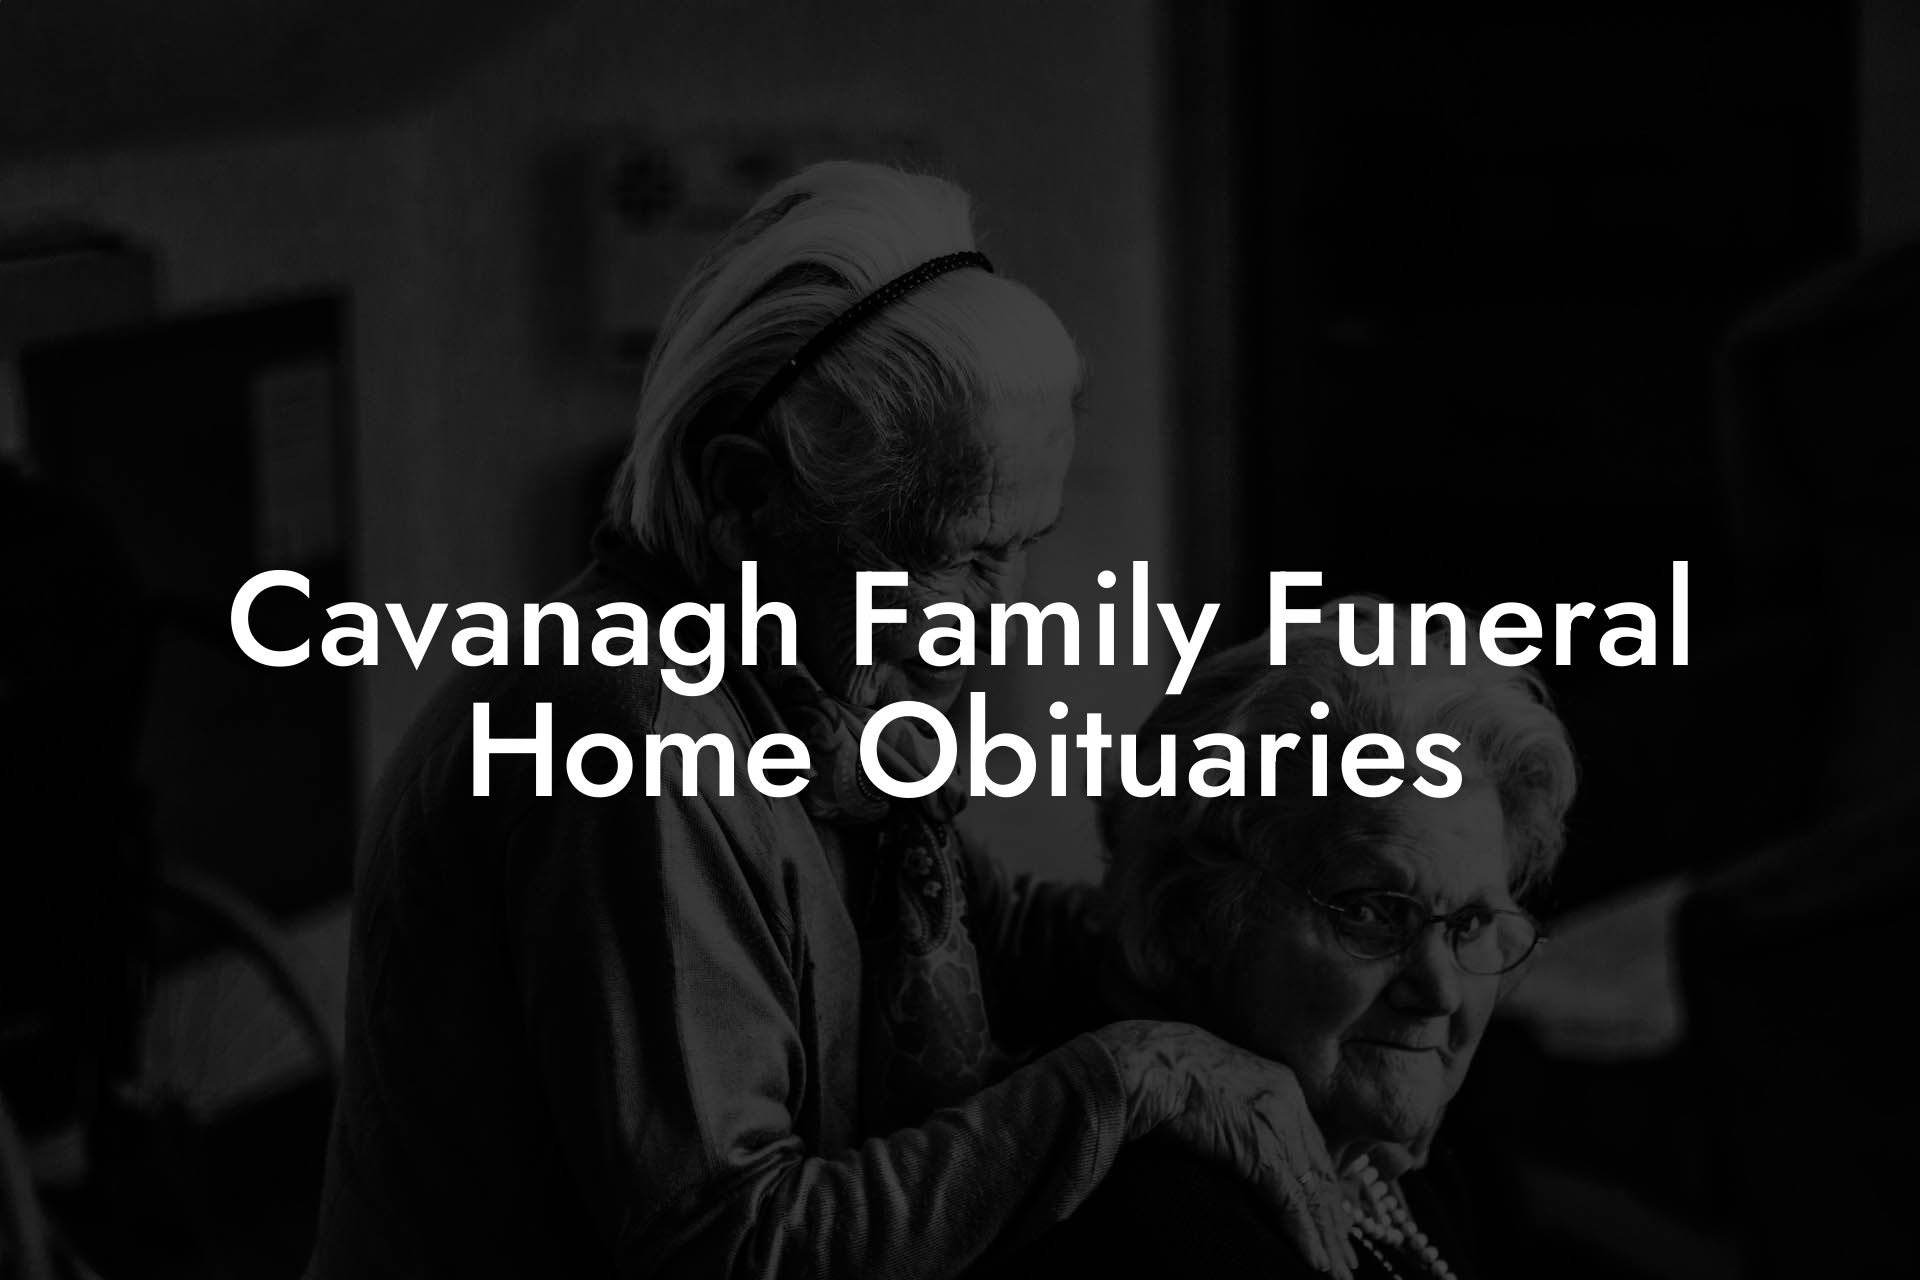 Cavanagh Family Funeral Home Obituaries